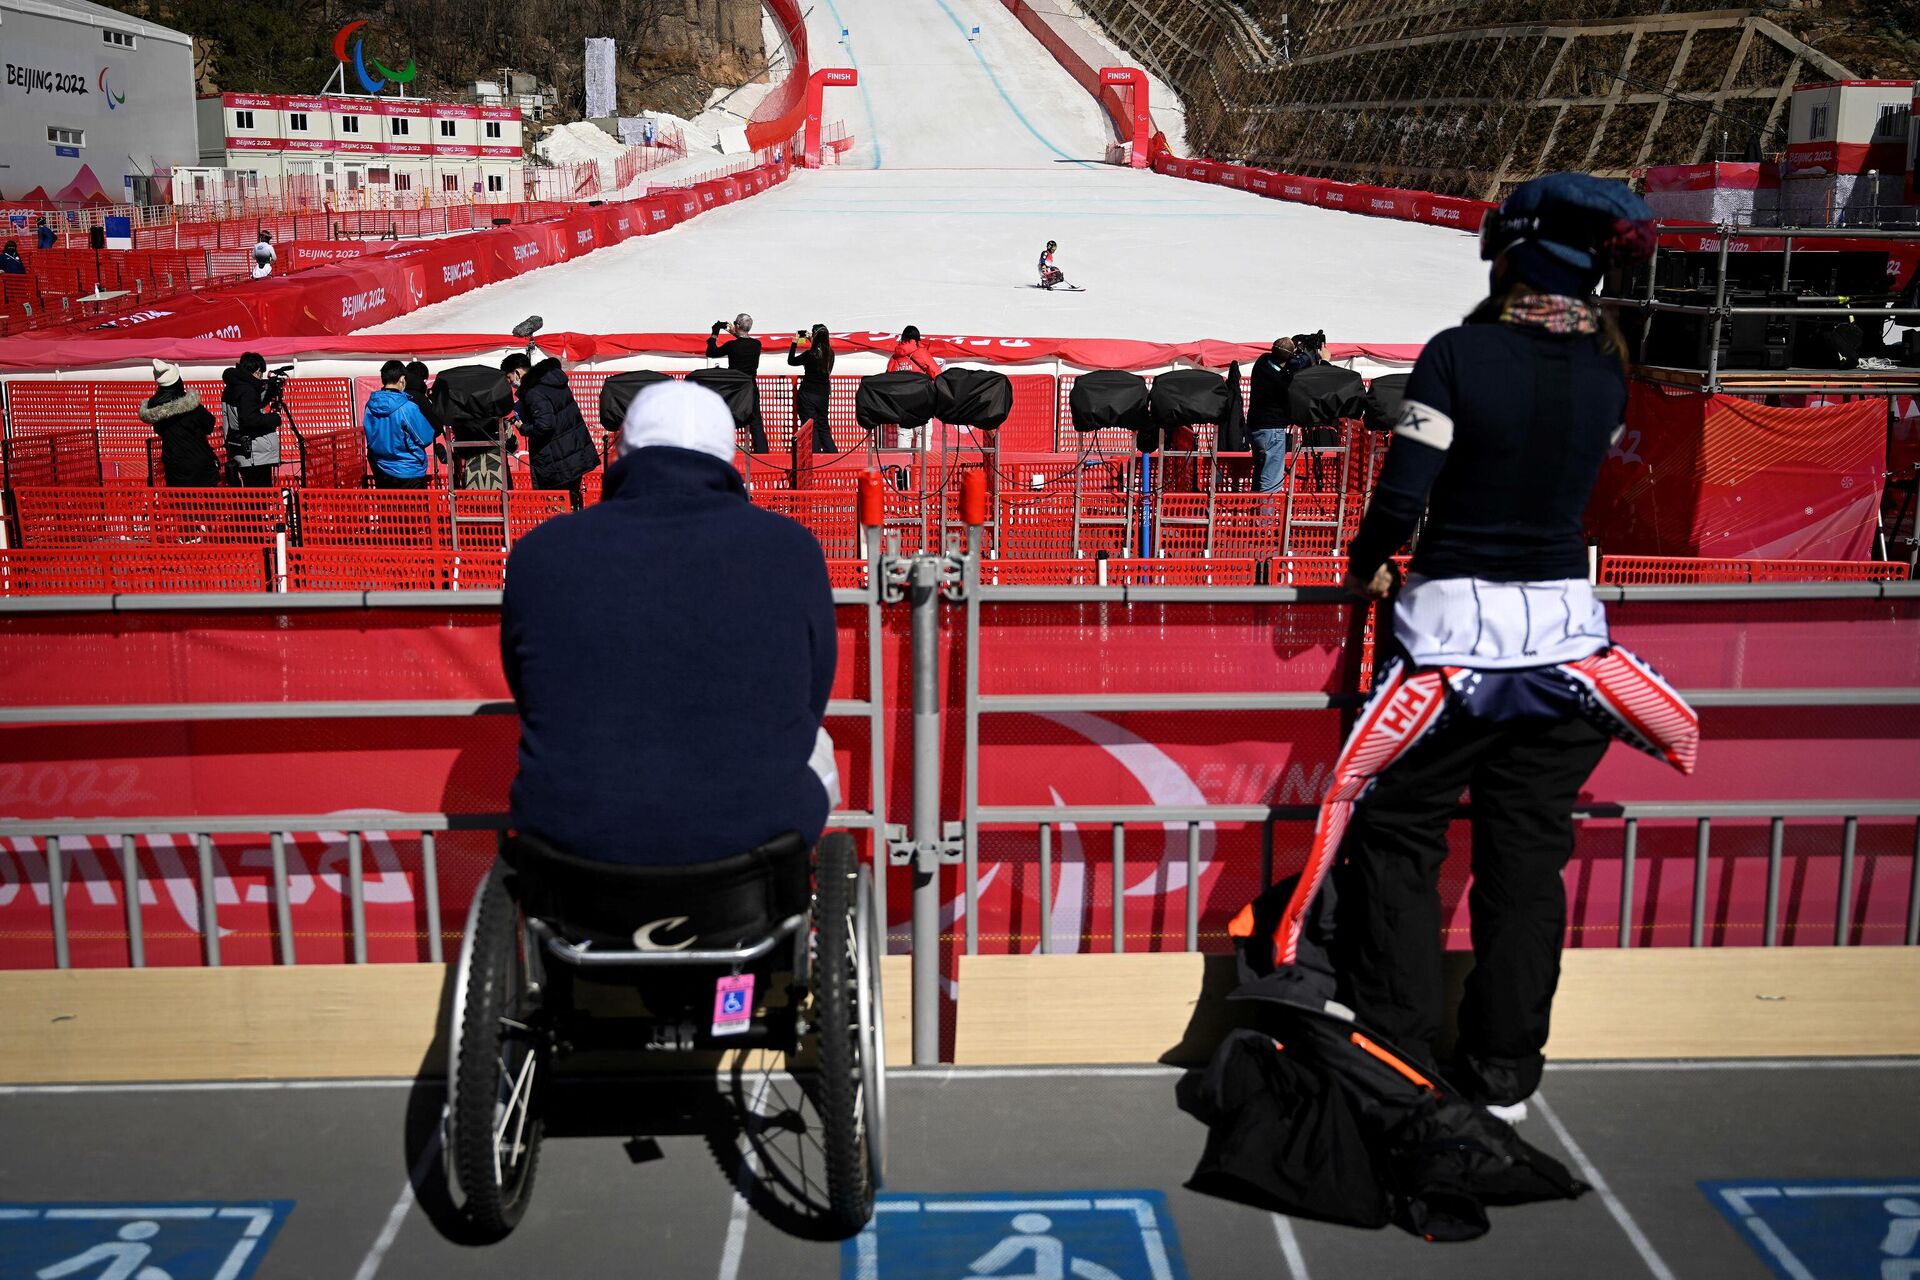 A paralympic athlete crosses the finish line during a training session for the men's downhill sitting event at the Yanqing National Alpine Skiing Centre in Yanqing ahead of the Beijing 2022 Winter Paralympic Games on March 3, 2022. - Sputnik International, 1920, 04.03.2022